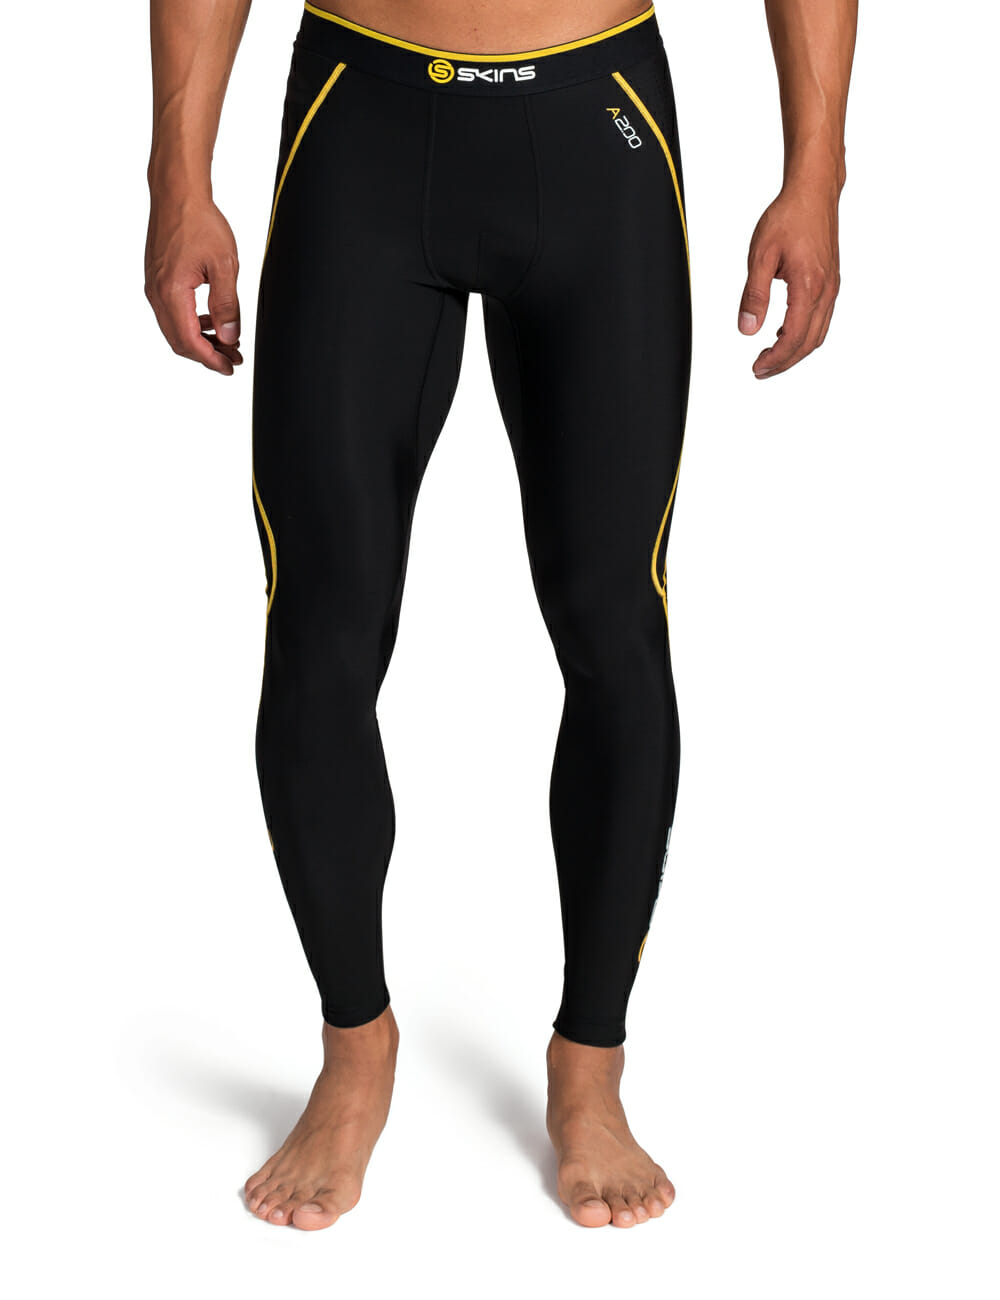 Skins A200 Men's Short Sleeve Compression Top, Small, Black/Yellow